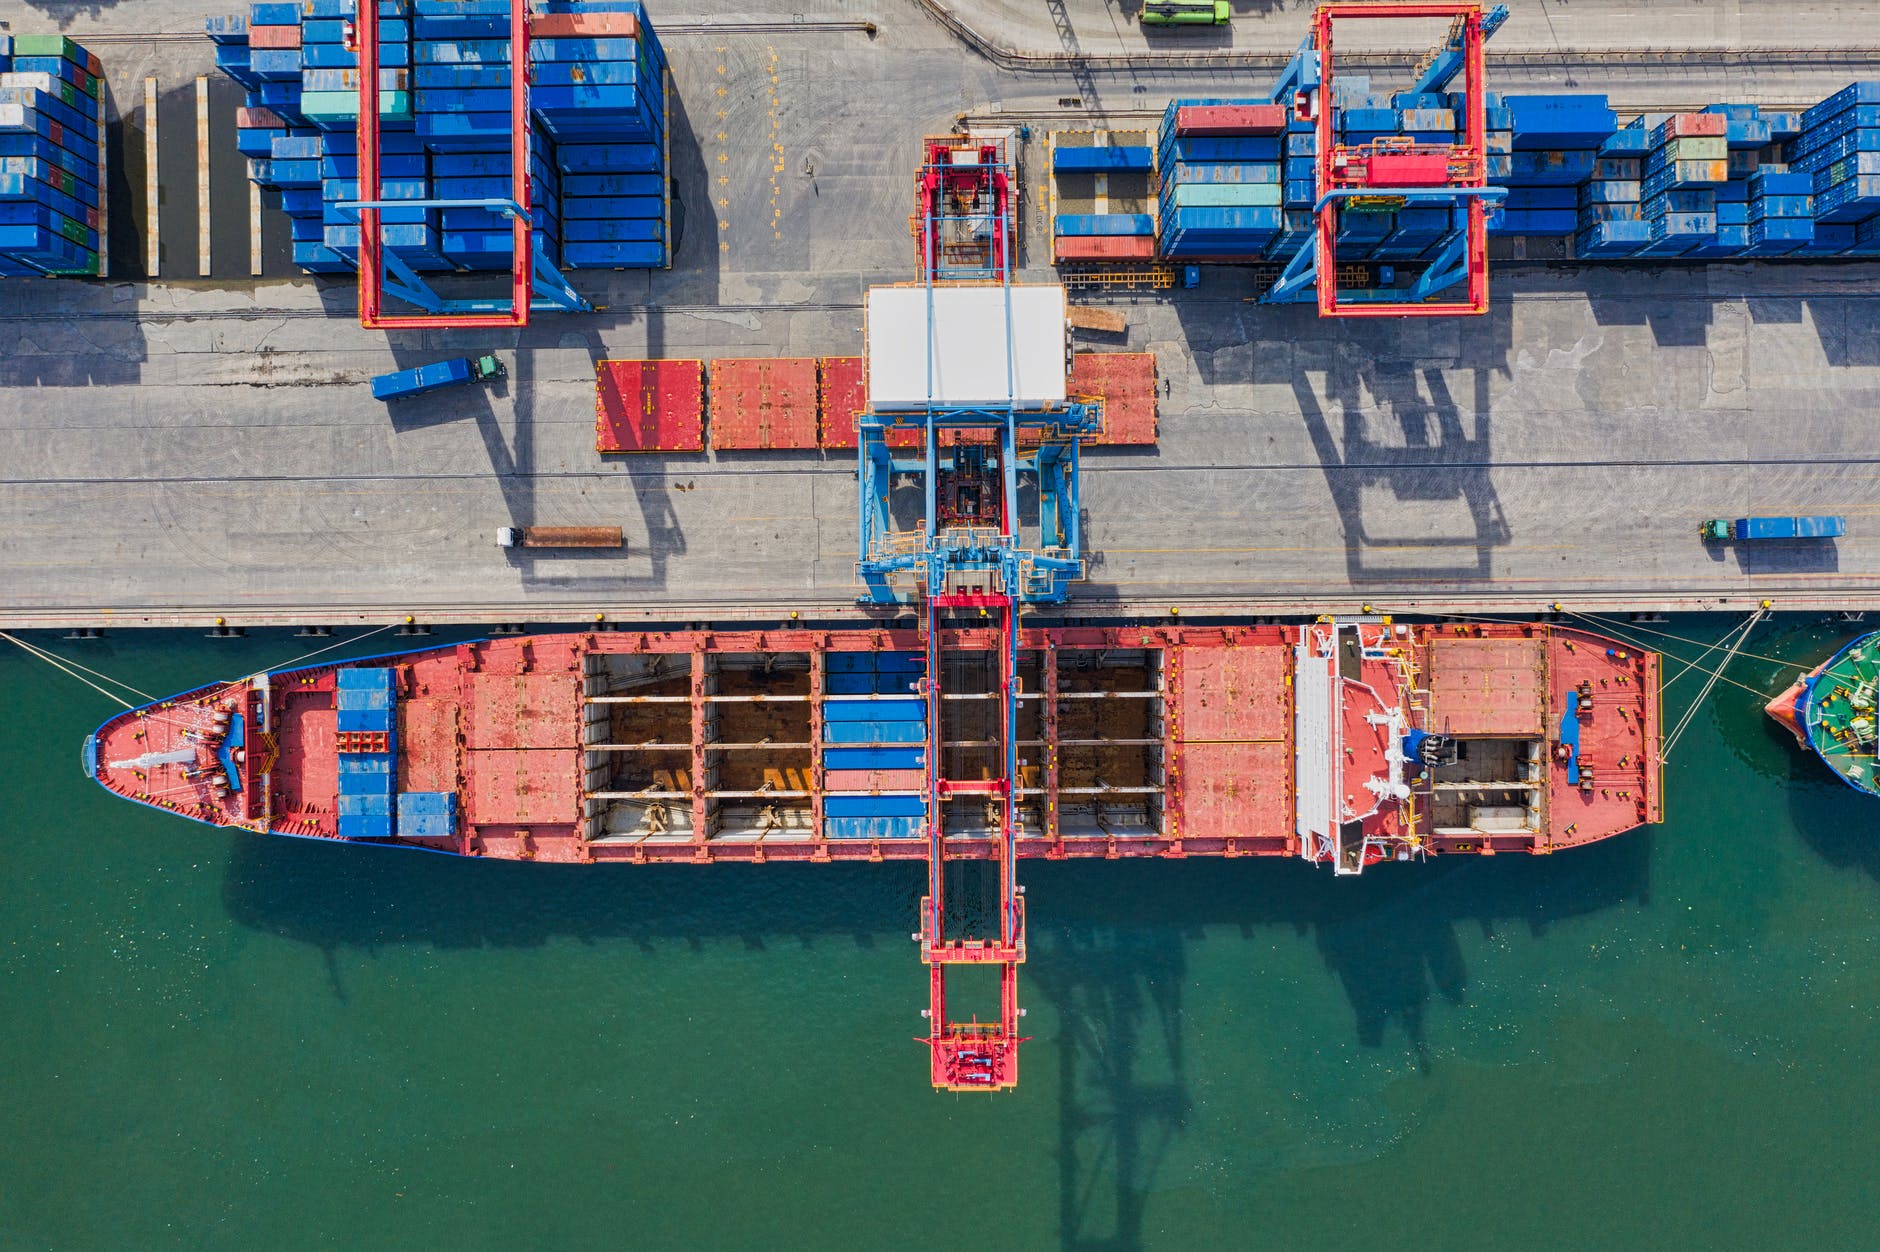 Aerial view of a container ship at a dock